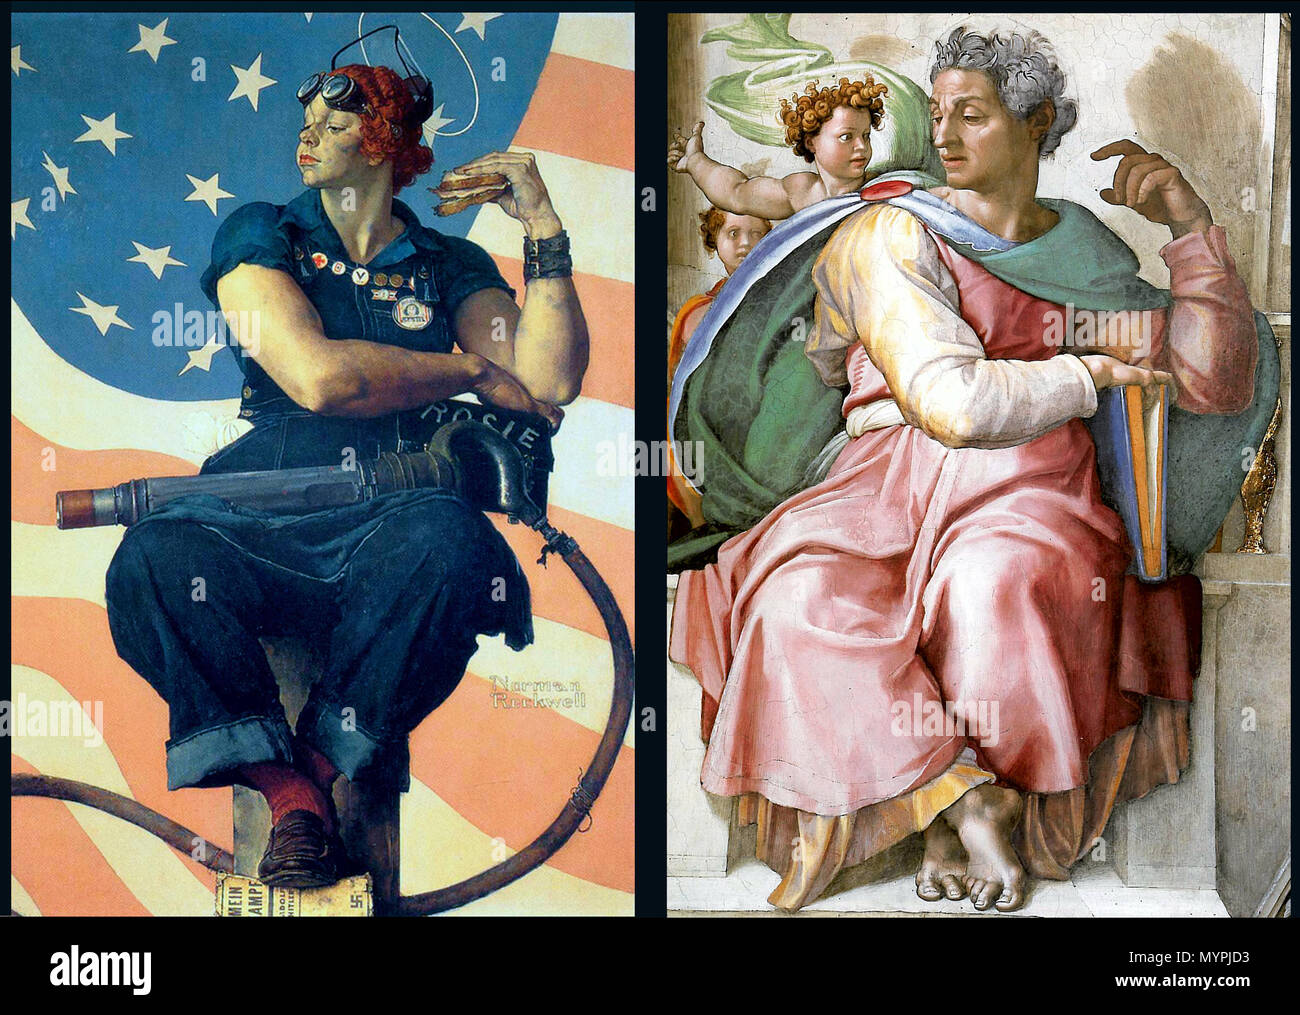 English: Two side-by-side images, one of Rosie the Riveter by Norman  Rockwell; the other of the prophet Isaiah by Michelangelo in the Sistine  Chapel. Rockwell modeled Rosie's pose closely on the